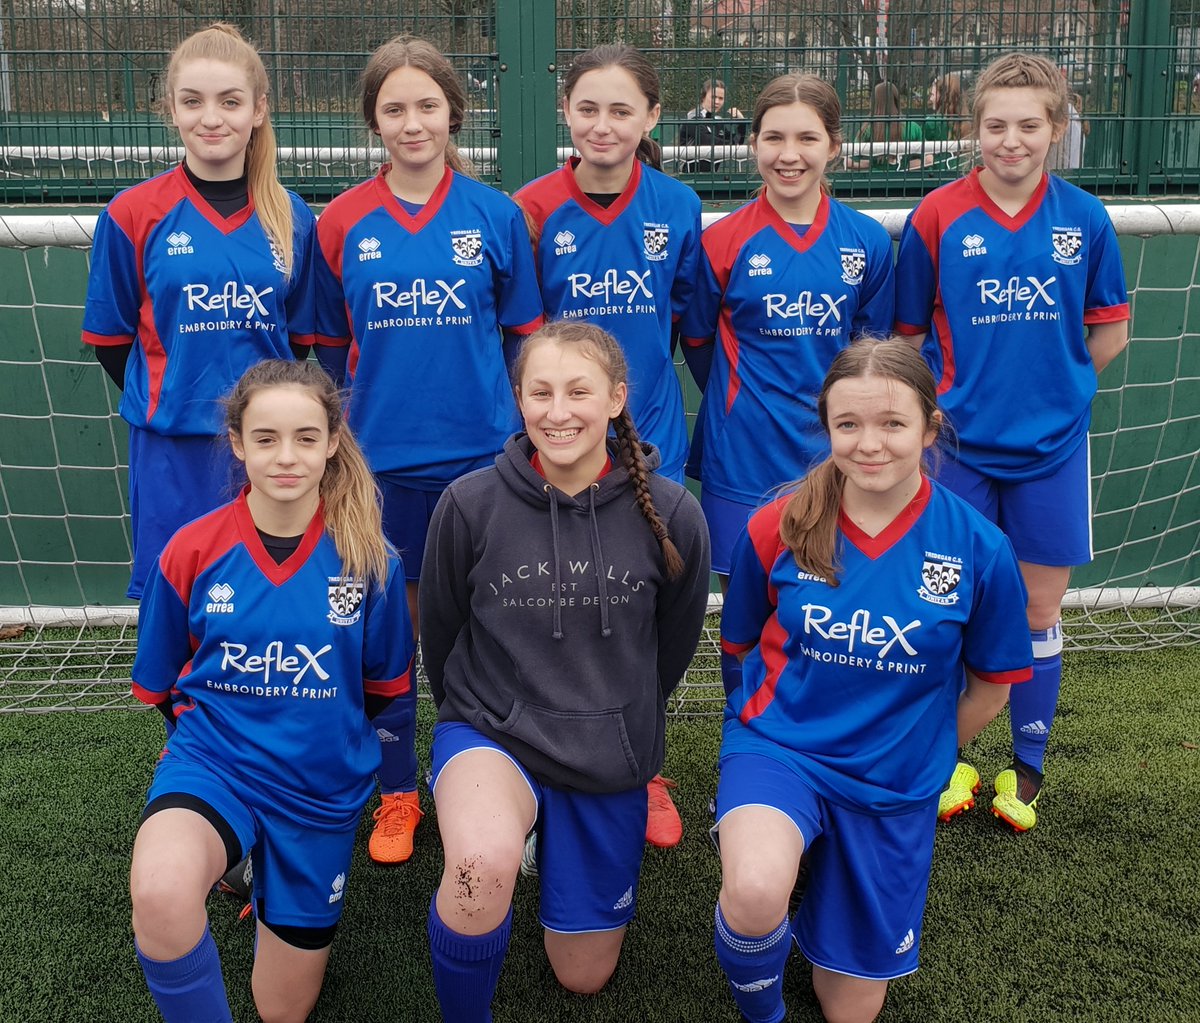 Proud of my Yr 9 girls today. All scored and contributed in fantastic squad effort that demonstrated determination & resilience. Da lawn Girls #Shieldwinners #u15s5asidewelshschools